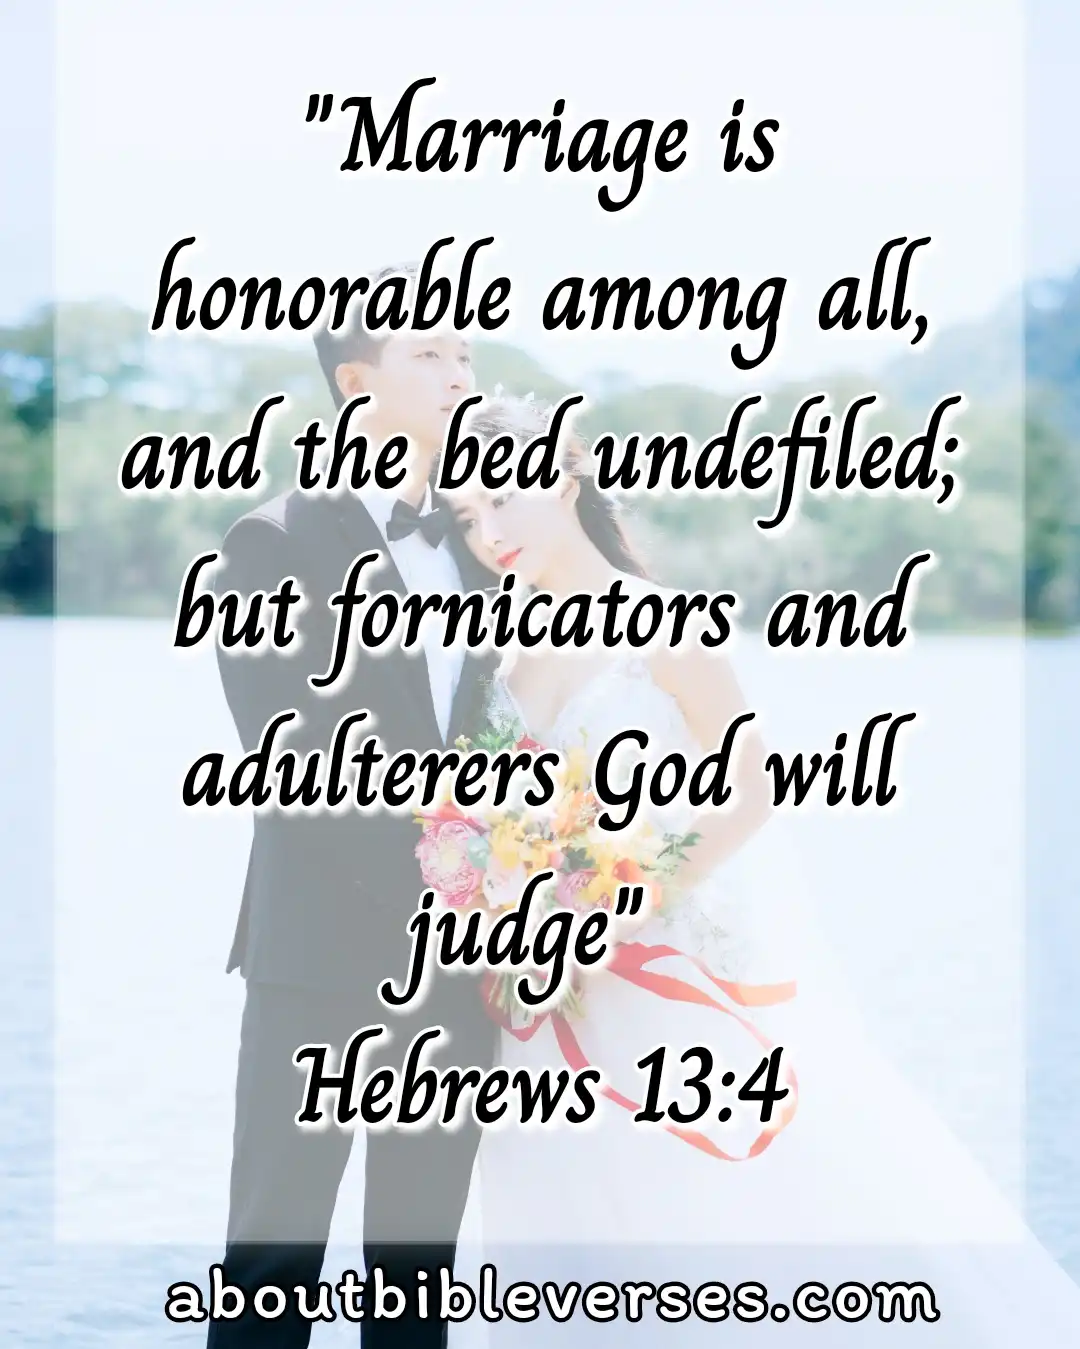 Husband And Wife Reunited In Heaven Bible Verses (Hebrews 13:4)